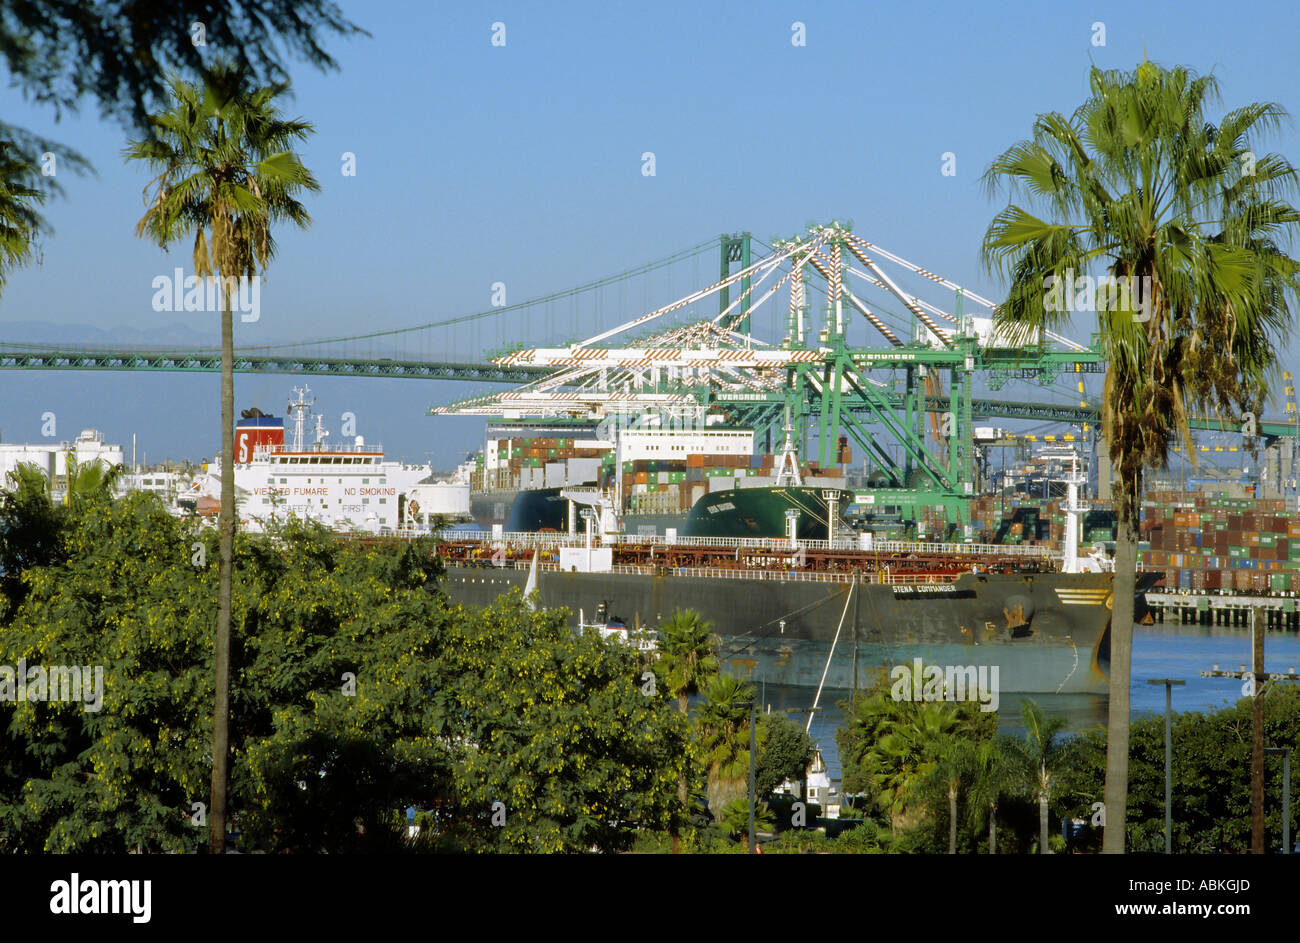 Cranes and ships in the Main Channel of the San Pedro harbor, California, in the background the Vincent Thomas Bridge Stock Photo